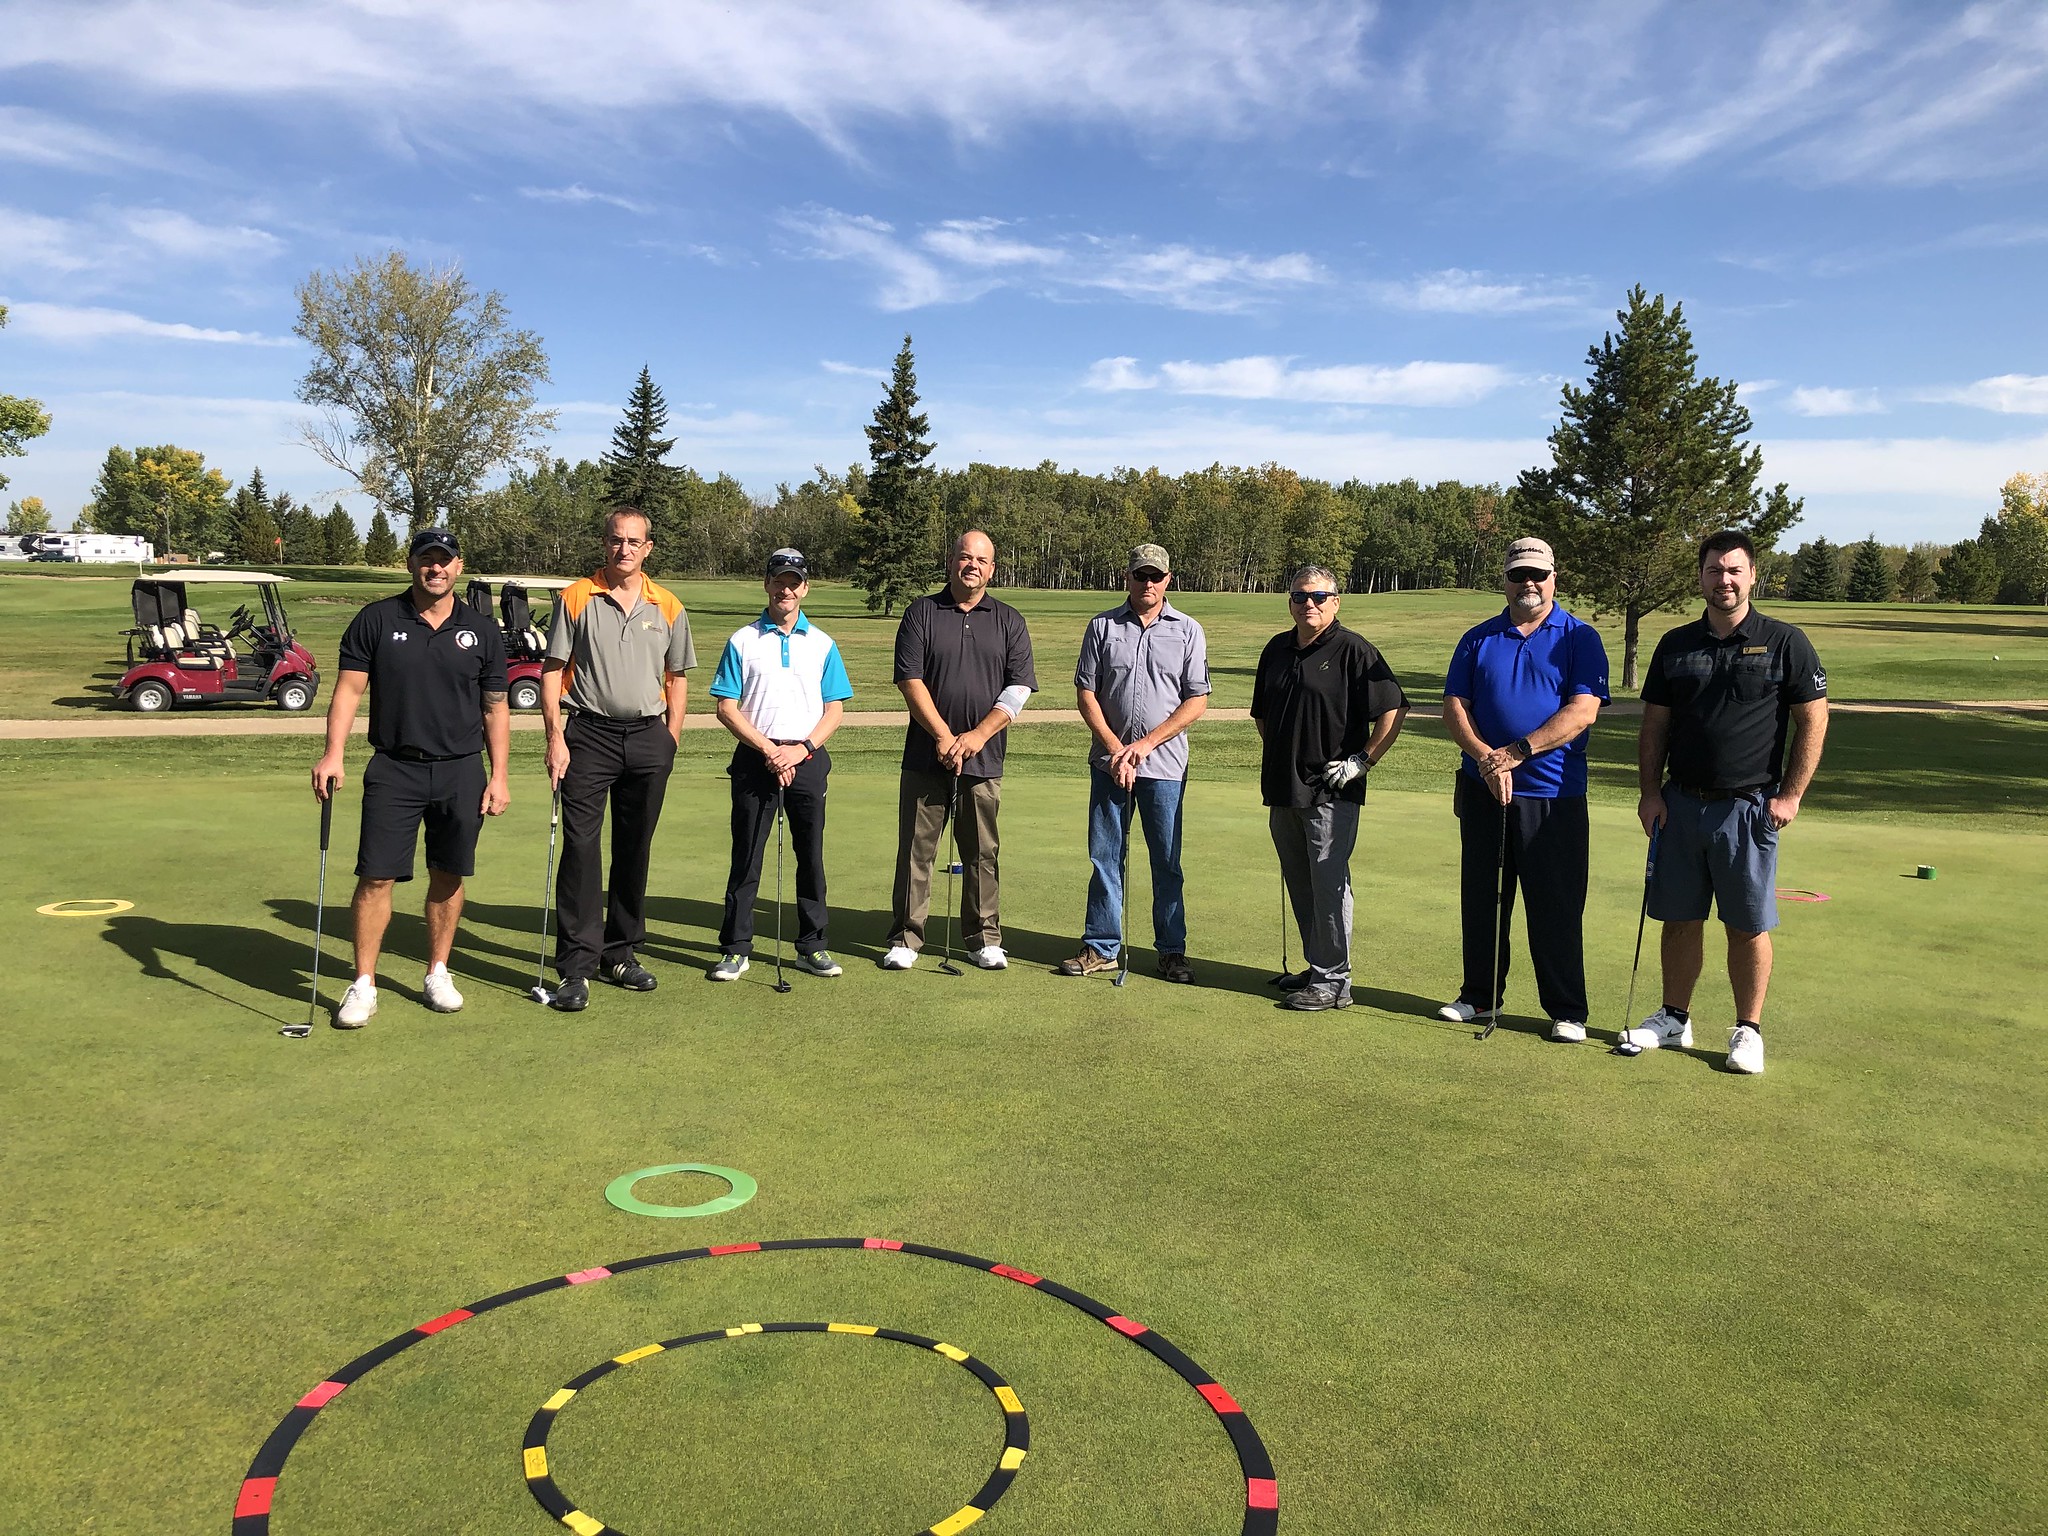 Golf Day in Wainwright, AB Image